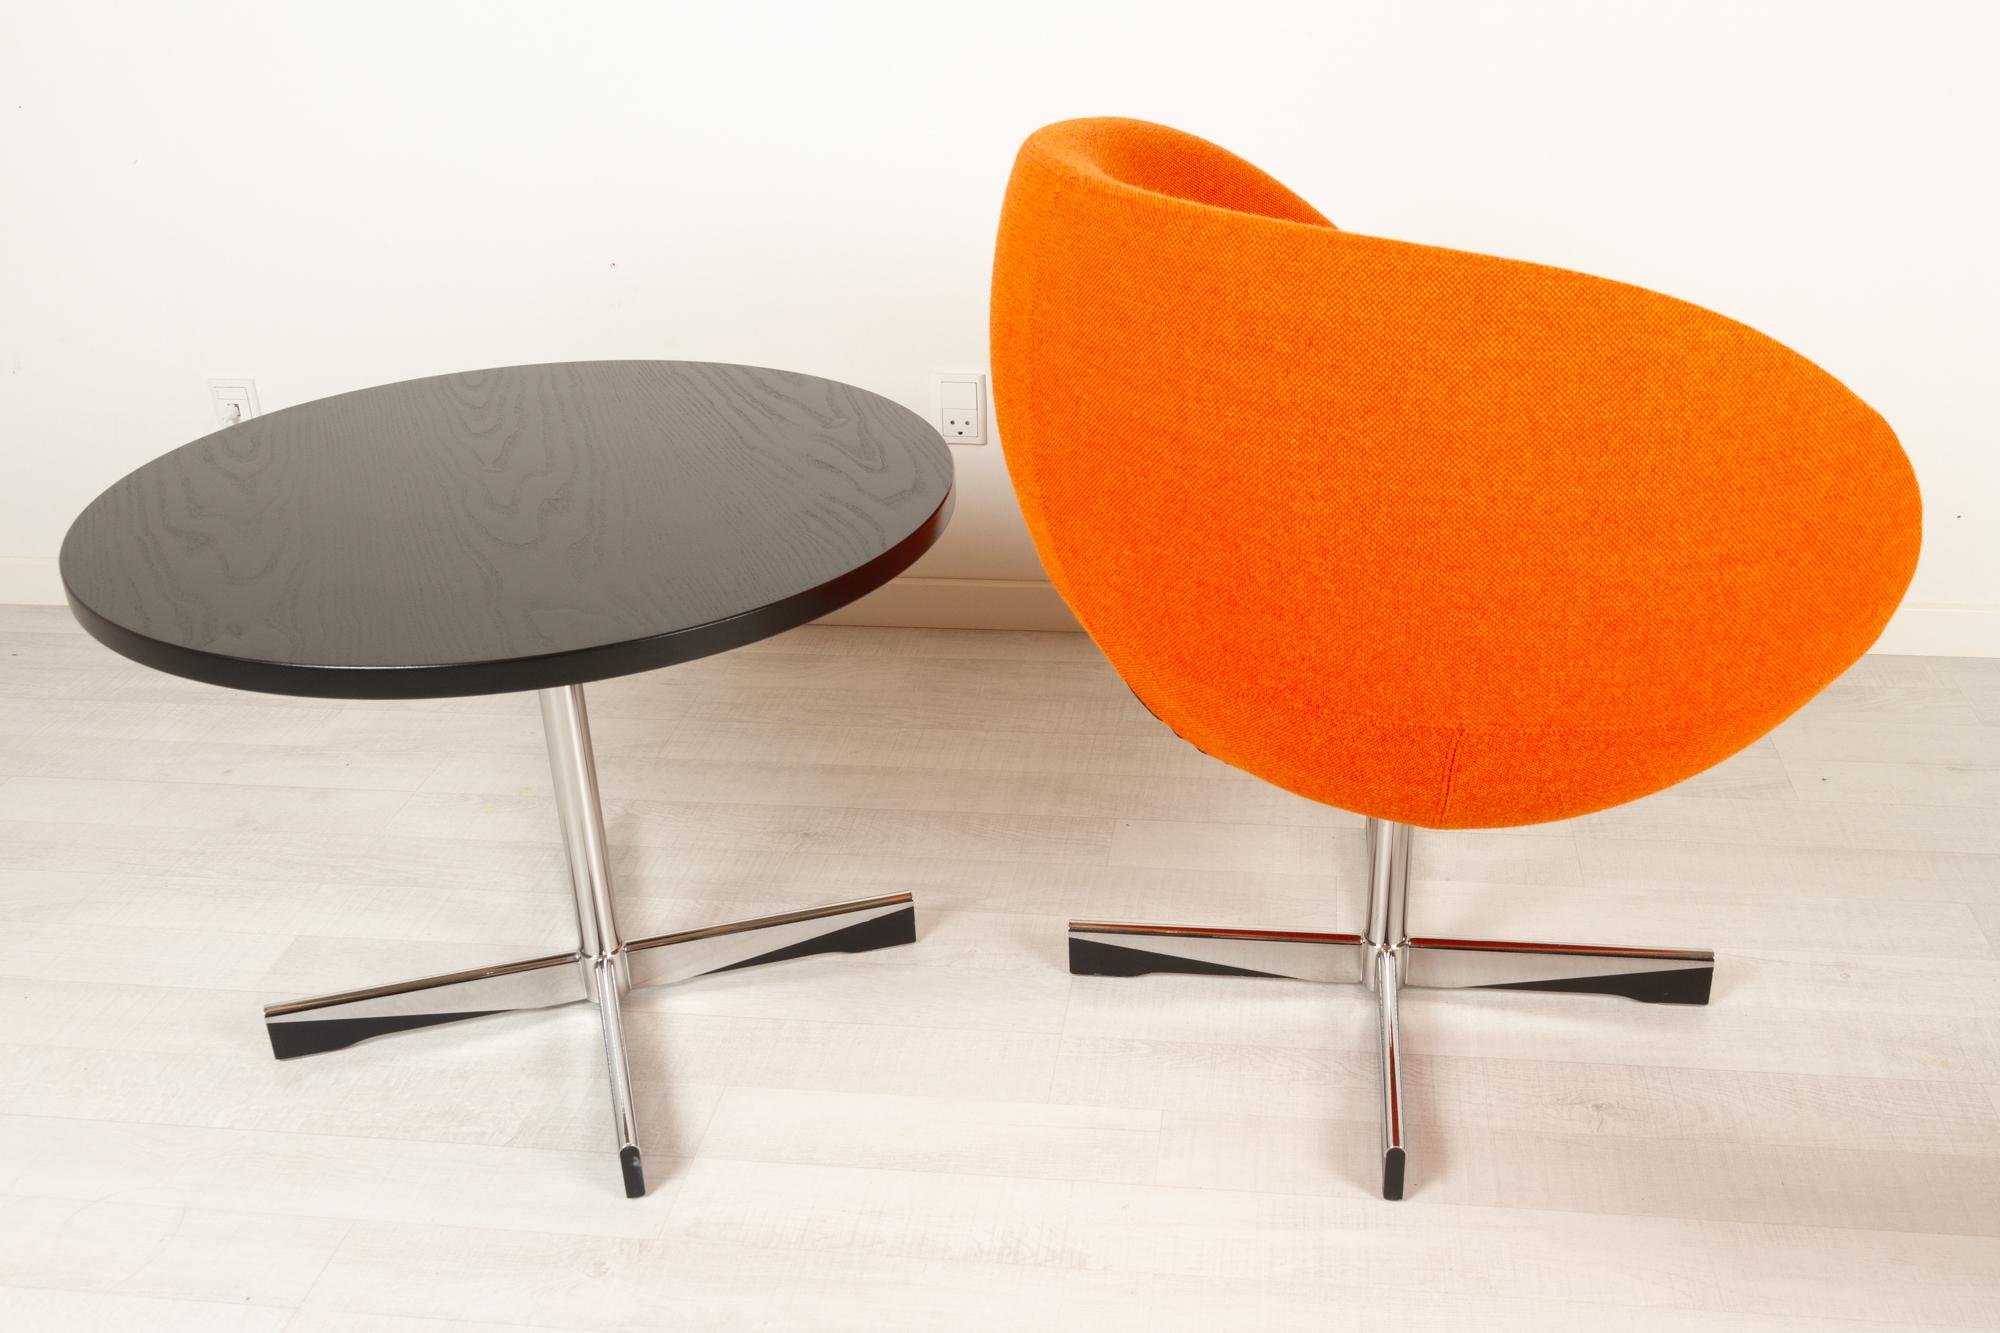 Contemporary Scandinavian Modern Lounge Chair and Table by Sven Ivar Dysthe, 21st Century